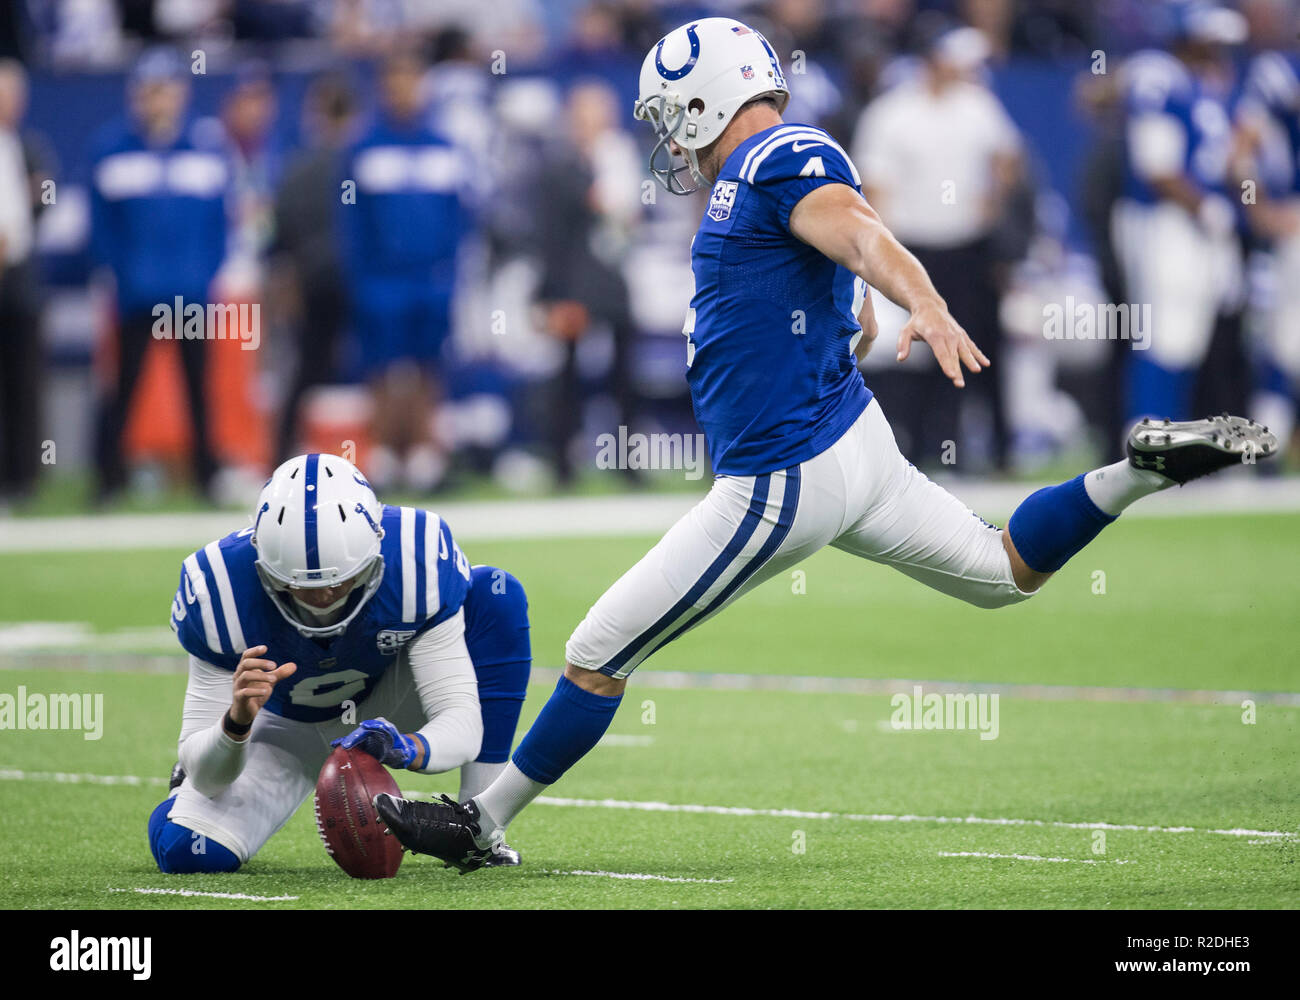 Indianapolis, Indiana, USA. 18th Nov, 2018. Indianapolis Colts placekicker Adam Vinatieri (4) kicks field goal out of the hold by Indianapolis Colts punter Rigoberto Sanchez (2) during NFL football game action between the Tennessee Titans and the Indianapolis Colts at Lucas Oil Stadium in Indianapolis, Indiana. Indianapolis defeated Tennessee 38-10. John Mersits/CSM/Alamy Live News Stock Photo